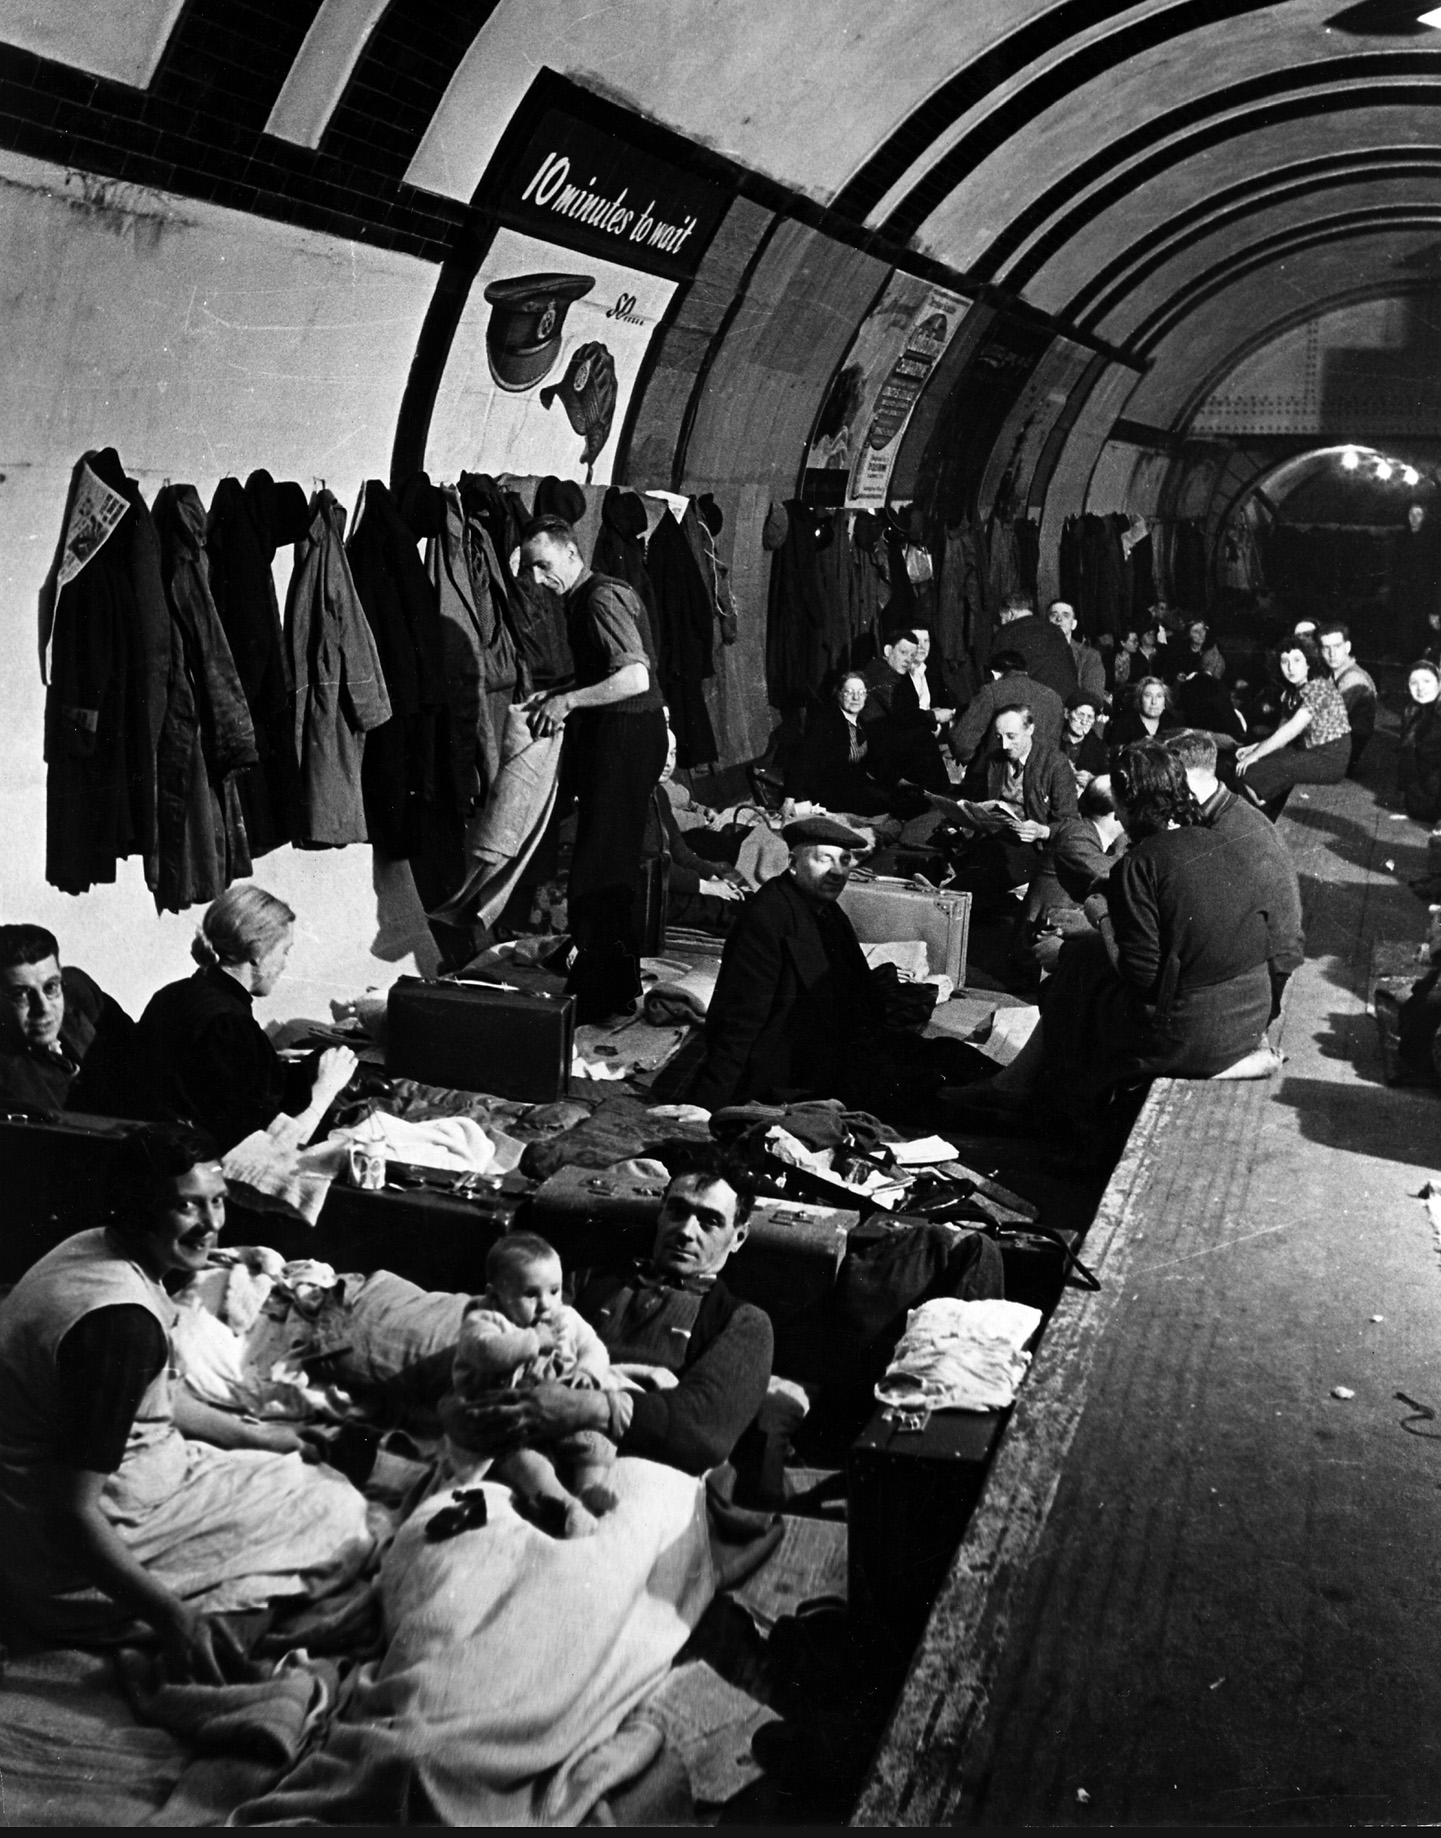 Citizens of London make do with their safe space in the city’s underground. The subway tunnels had few of the comforts of home, but Londoners found a sense of shared suffering and comradeship while the Nazi Luftwaffe rained bombs on their city.